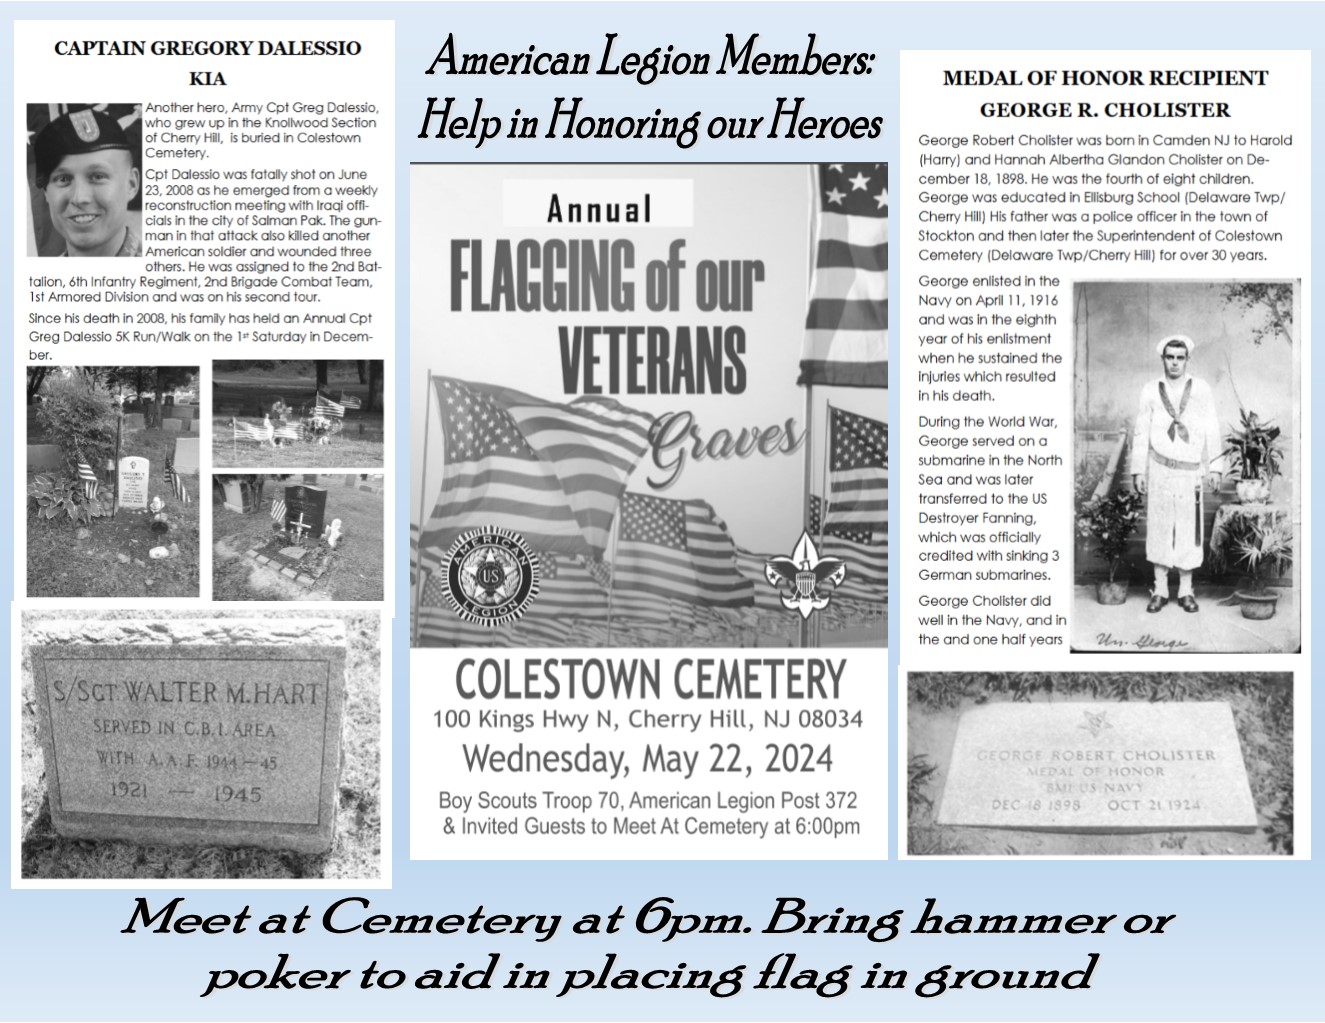 Flagging of Colestown Cemetery